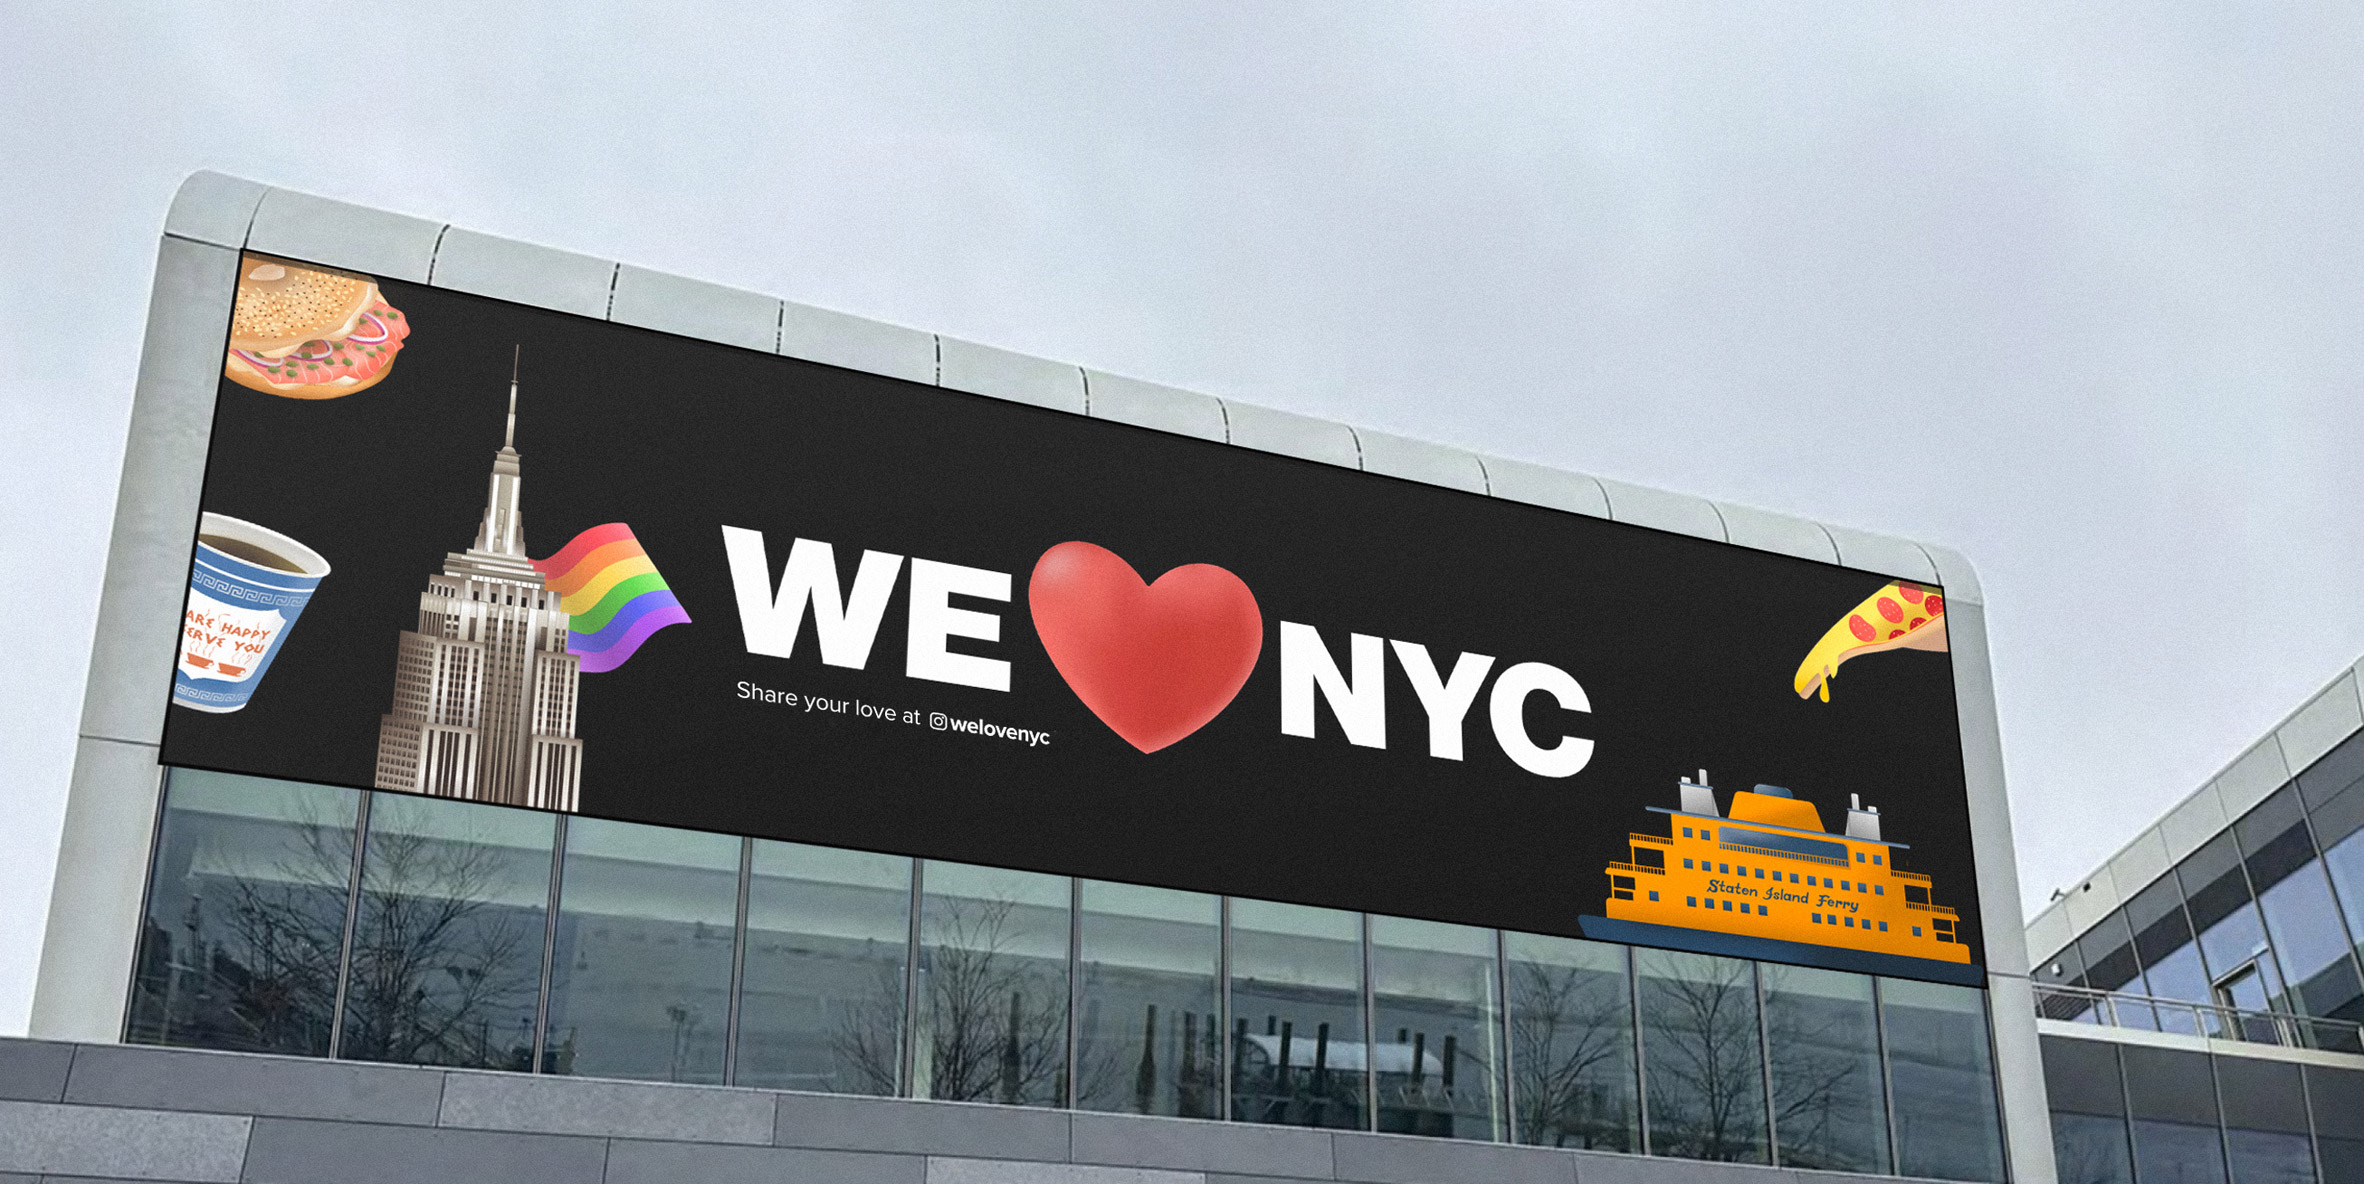 We Heart NYC logo by Graham Clifford for Partnership for New York City